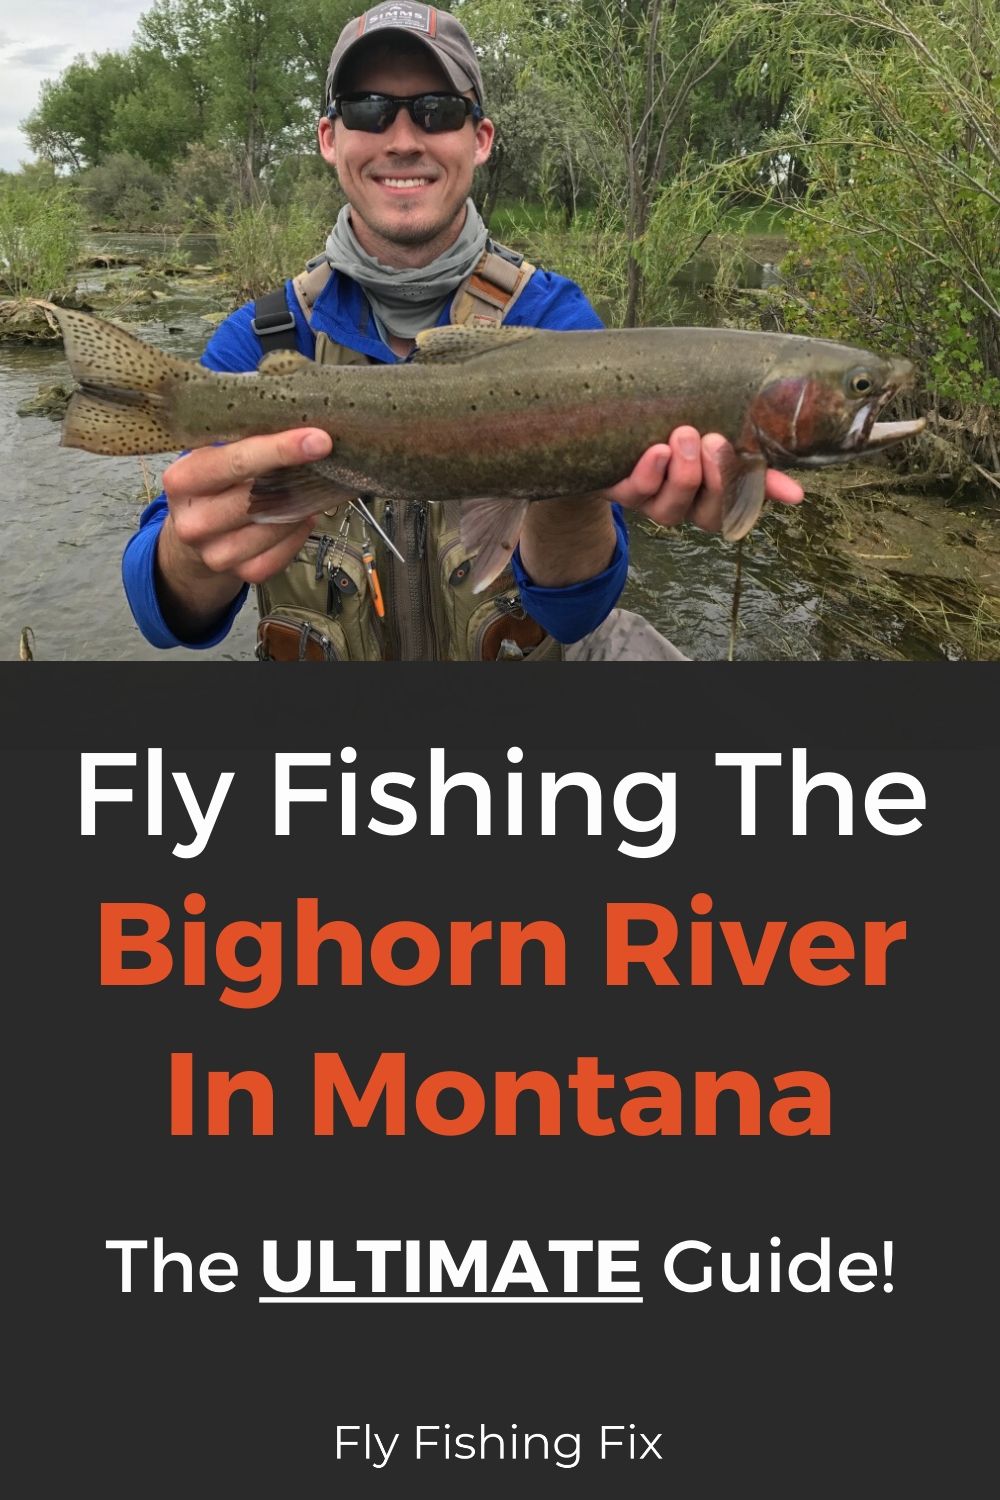 Fly fishing the Bighorn River in Montana: The ultimate guide | Fly Fishing Fix